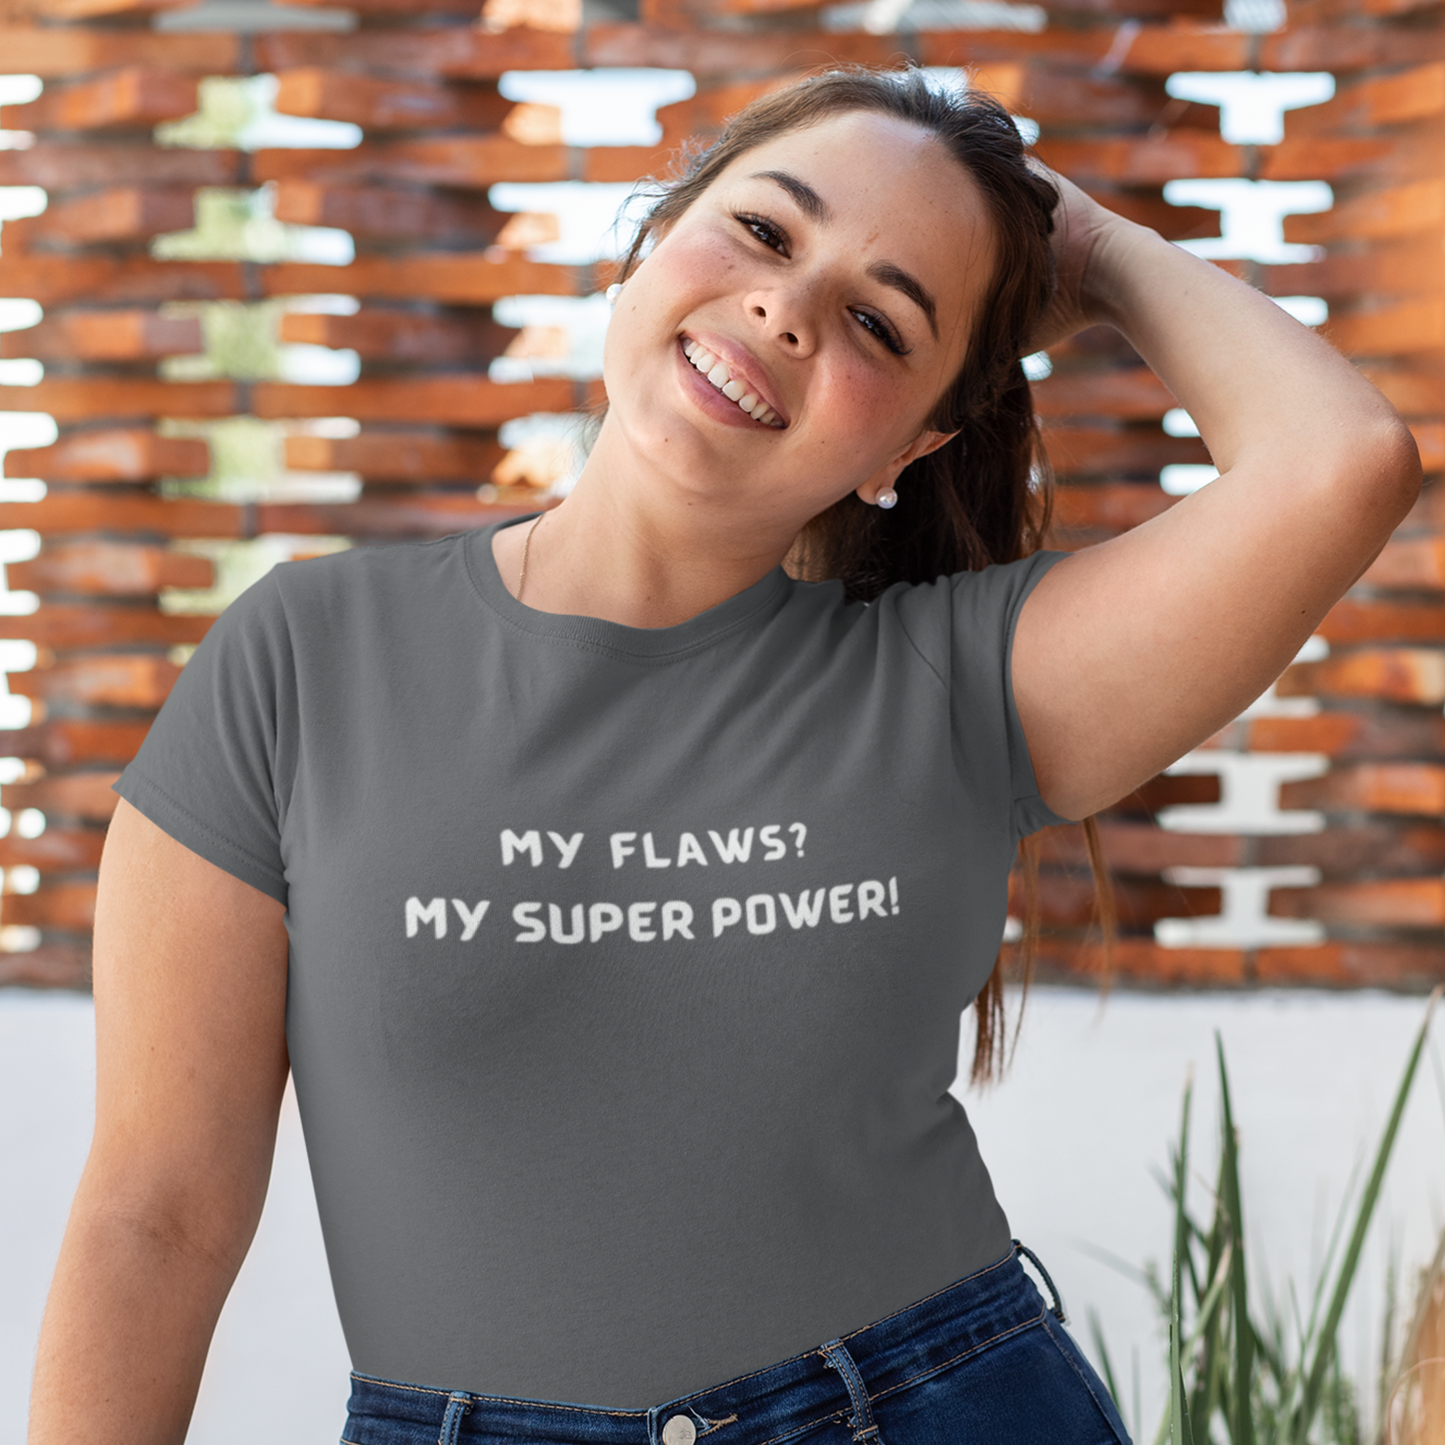 My flaws? My super power! unisex t shirt gift, tshirt with inspirational words